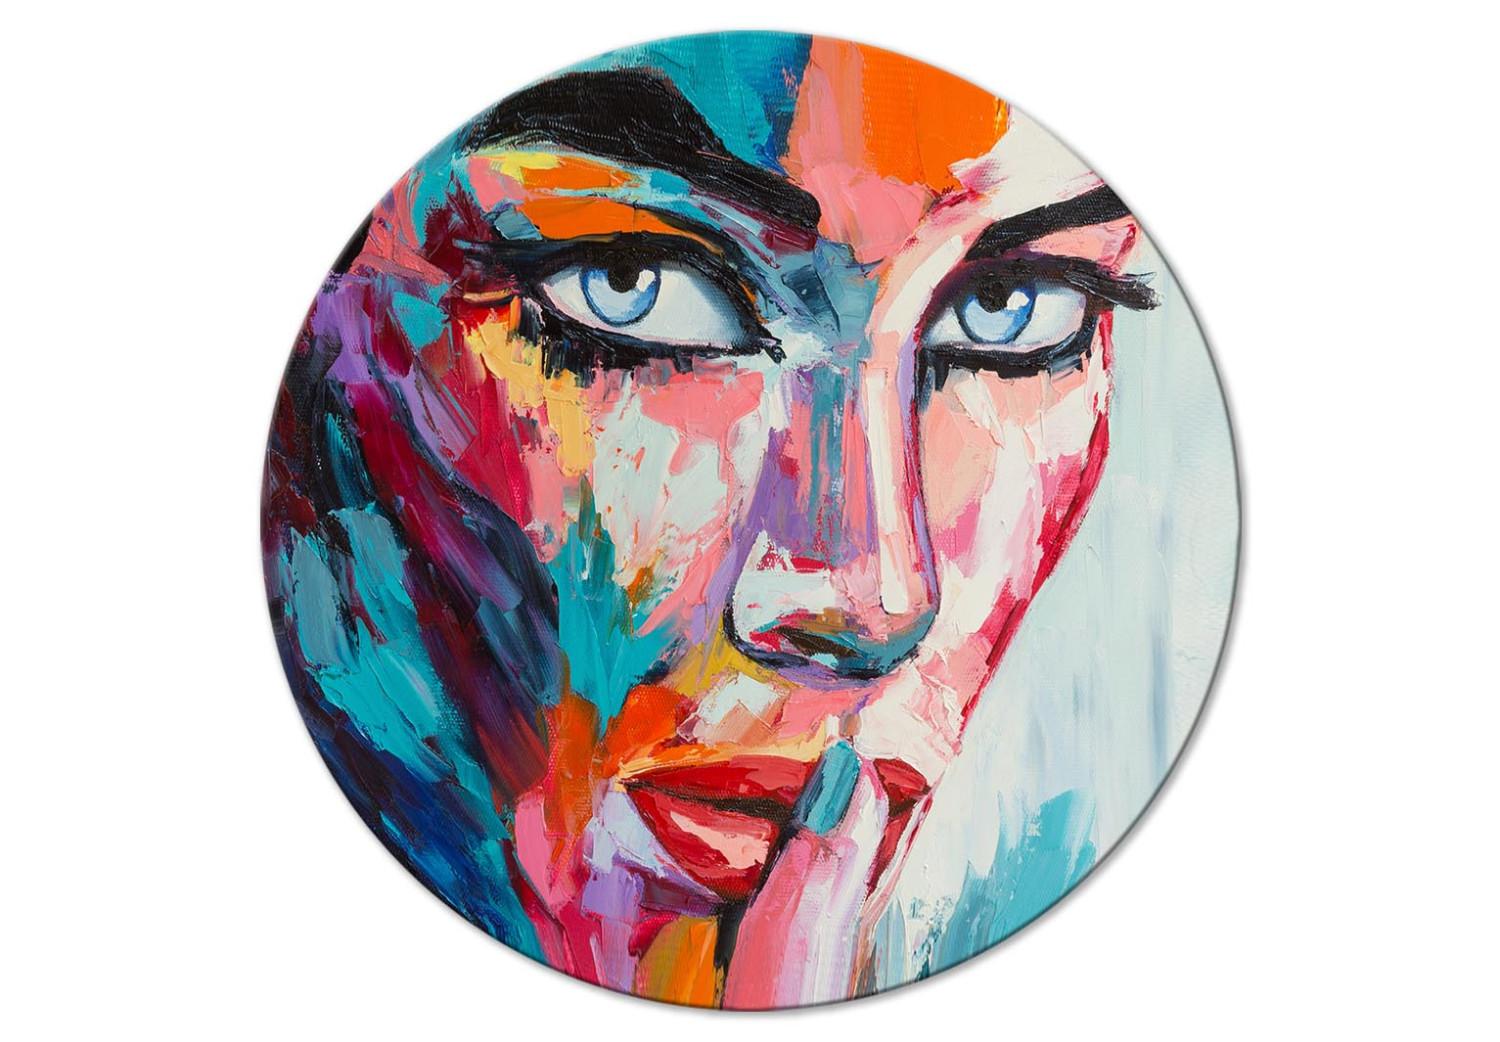 Round Canvas Colorful Face - Expressively Painted Portrait of a Woman